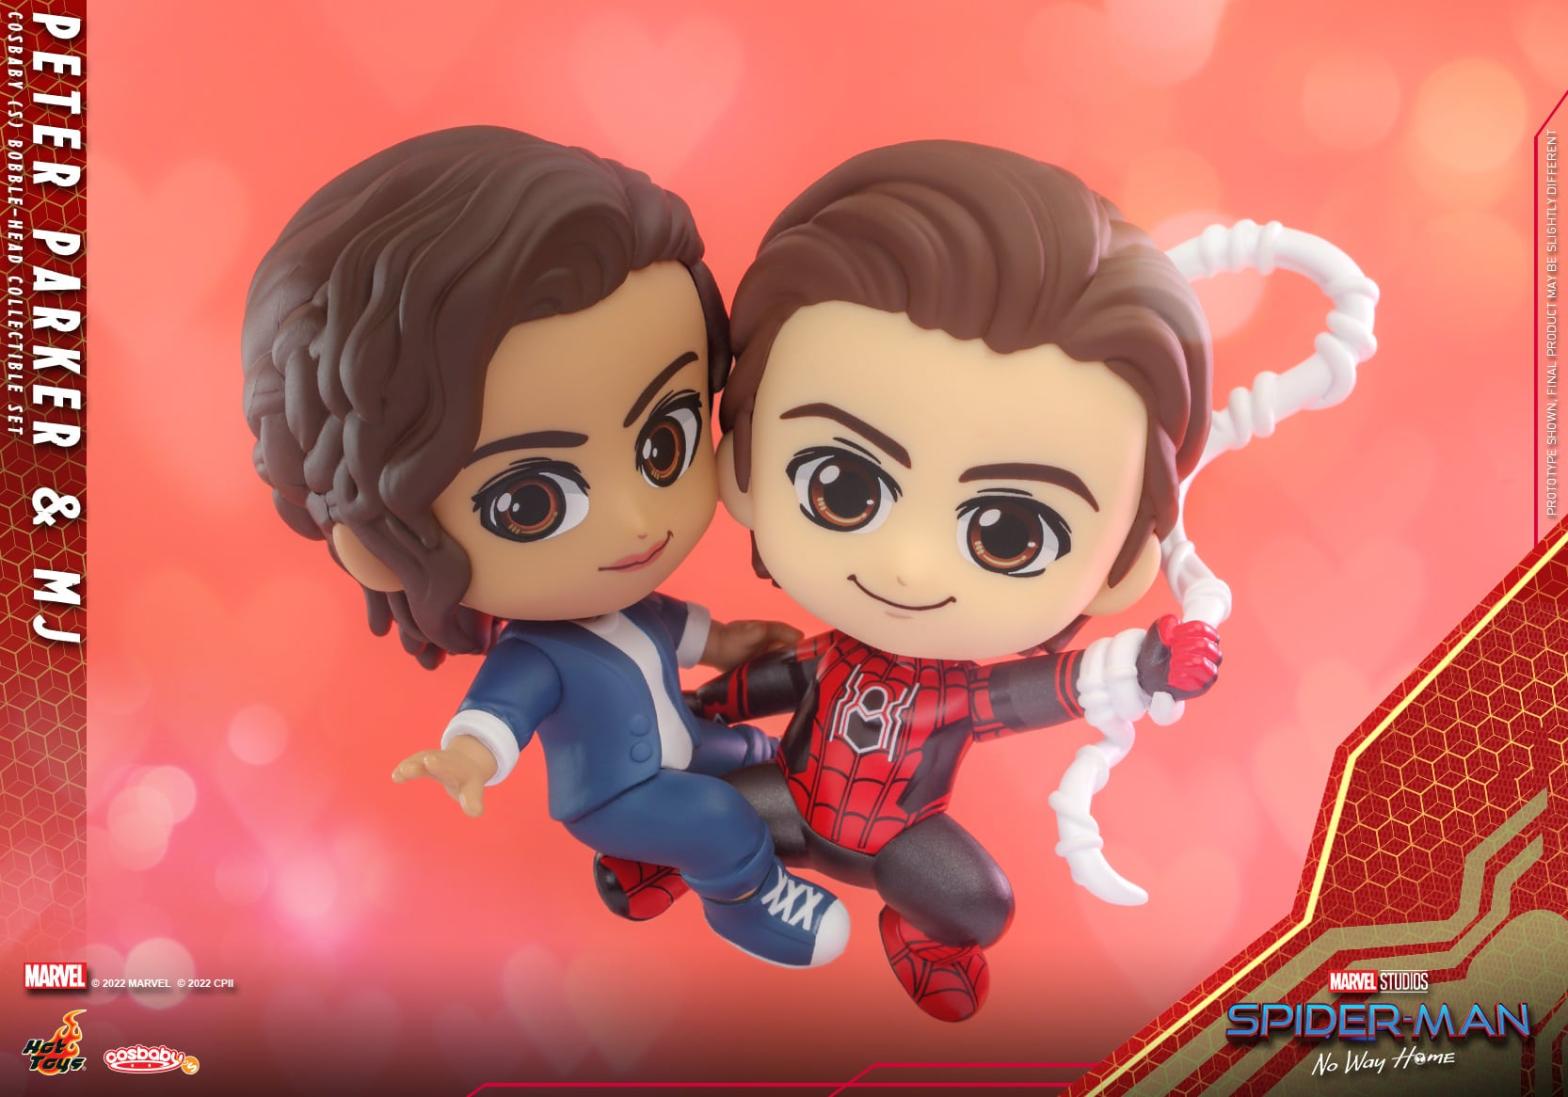 MJ and Peter swinging in baby form. Adorable. (Image: Hot Toys)